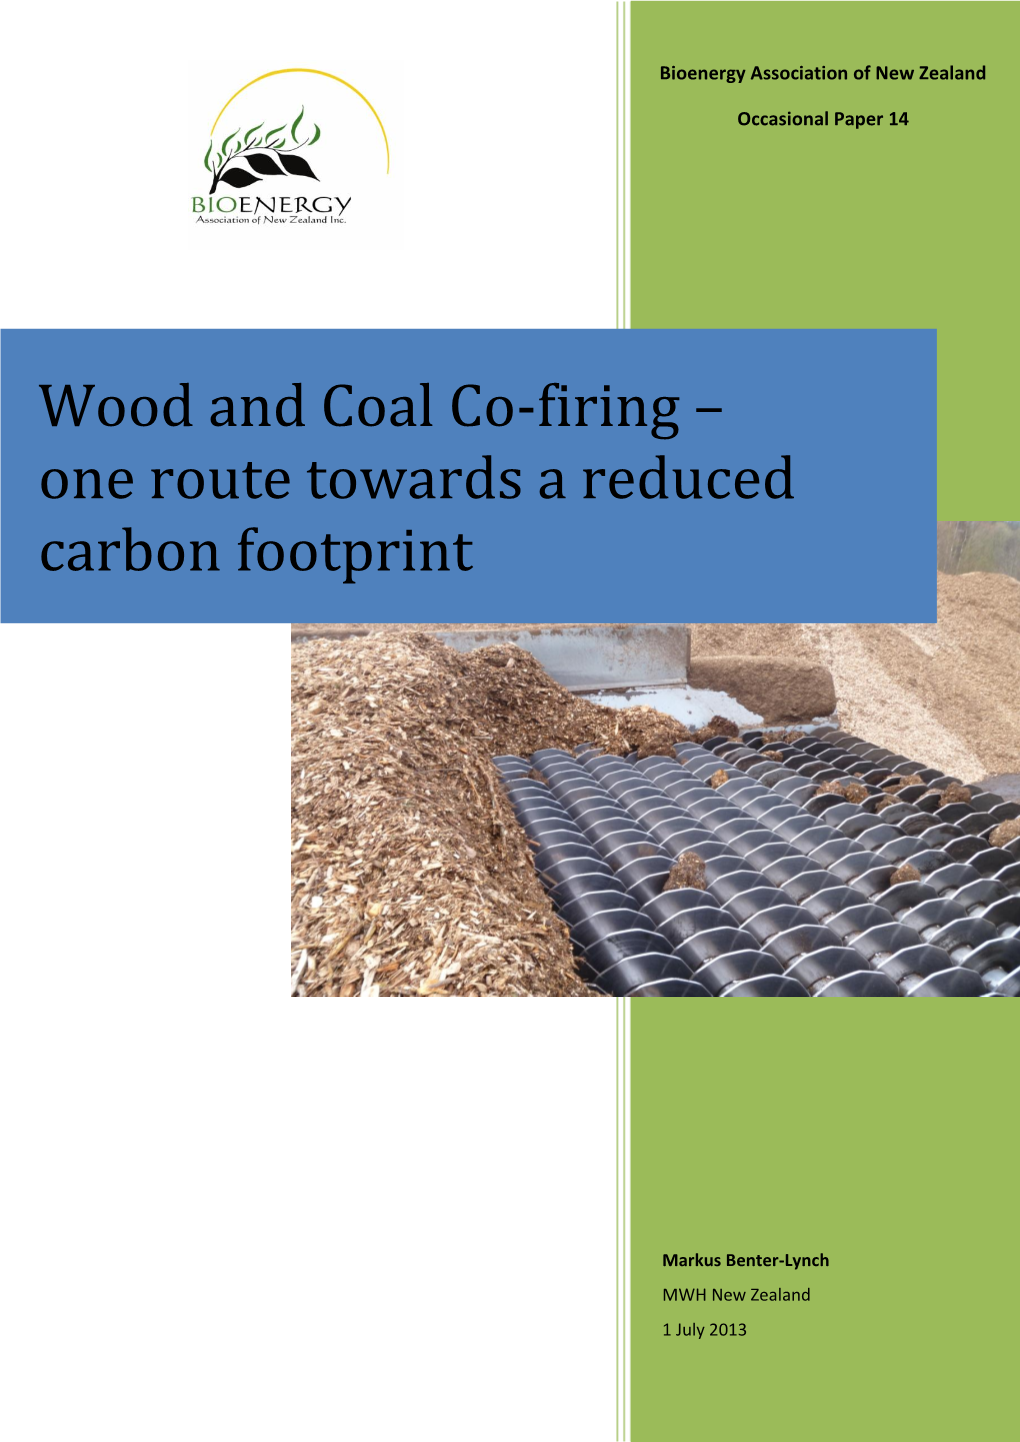 Wood and Coal Co-Firing – One Route Towards a Reduced Carbon Footprint